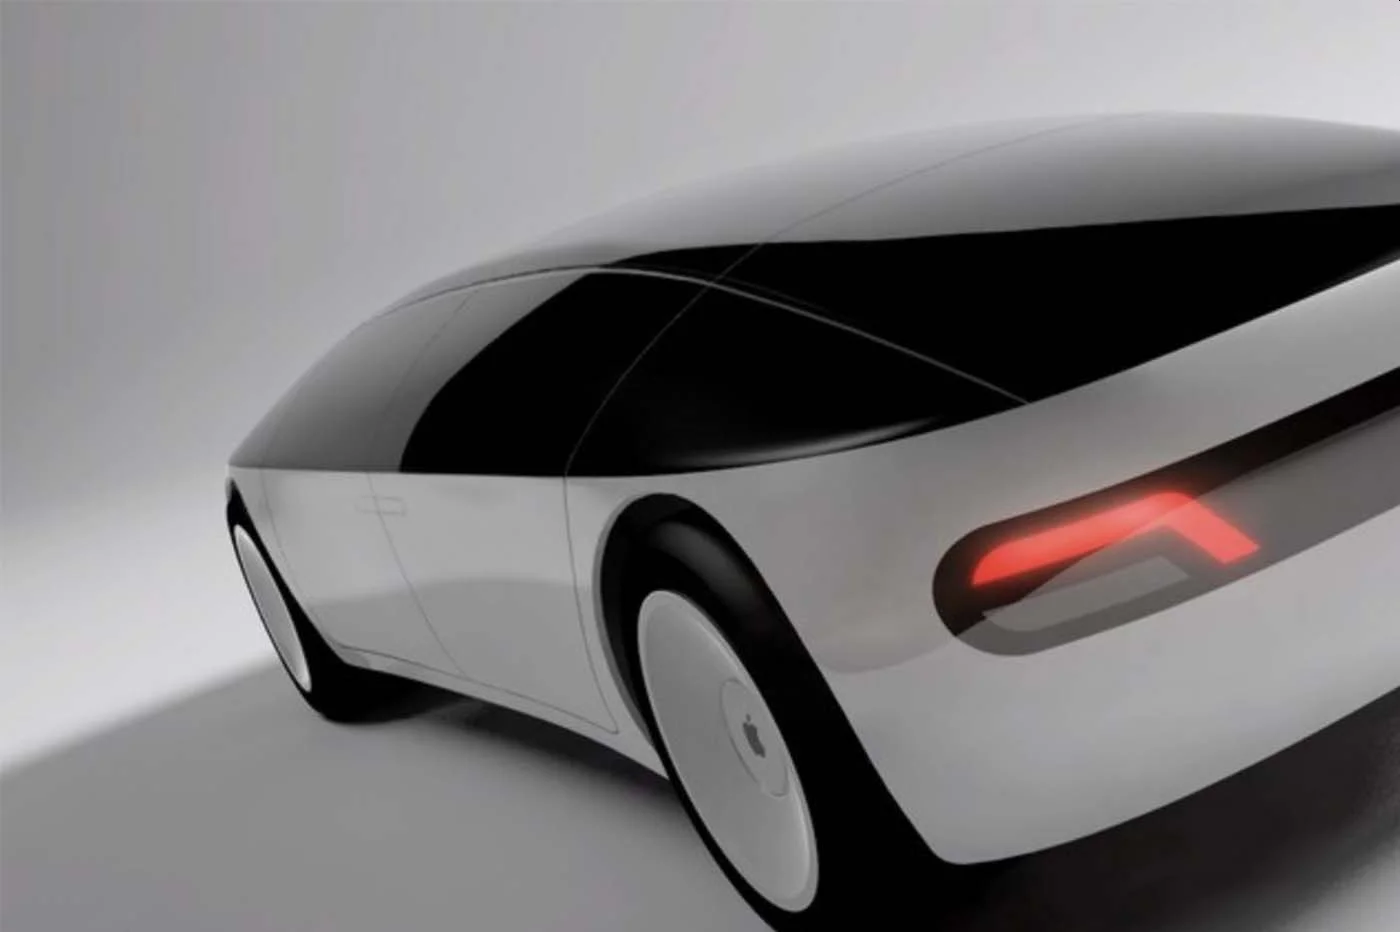 Apple's electric car to launch sooner than expected, plans to build team for 'Project Titan'